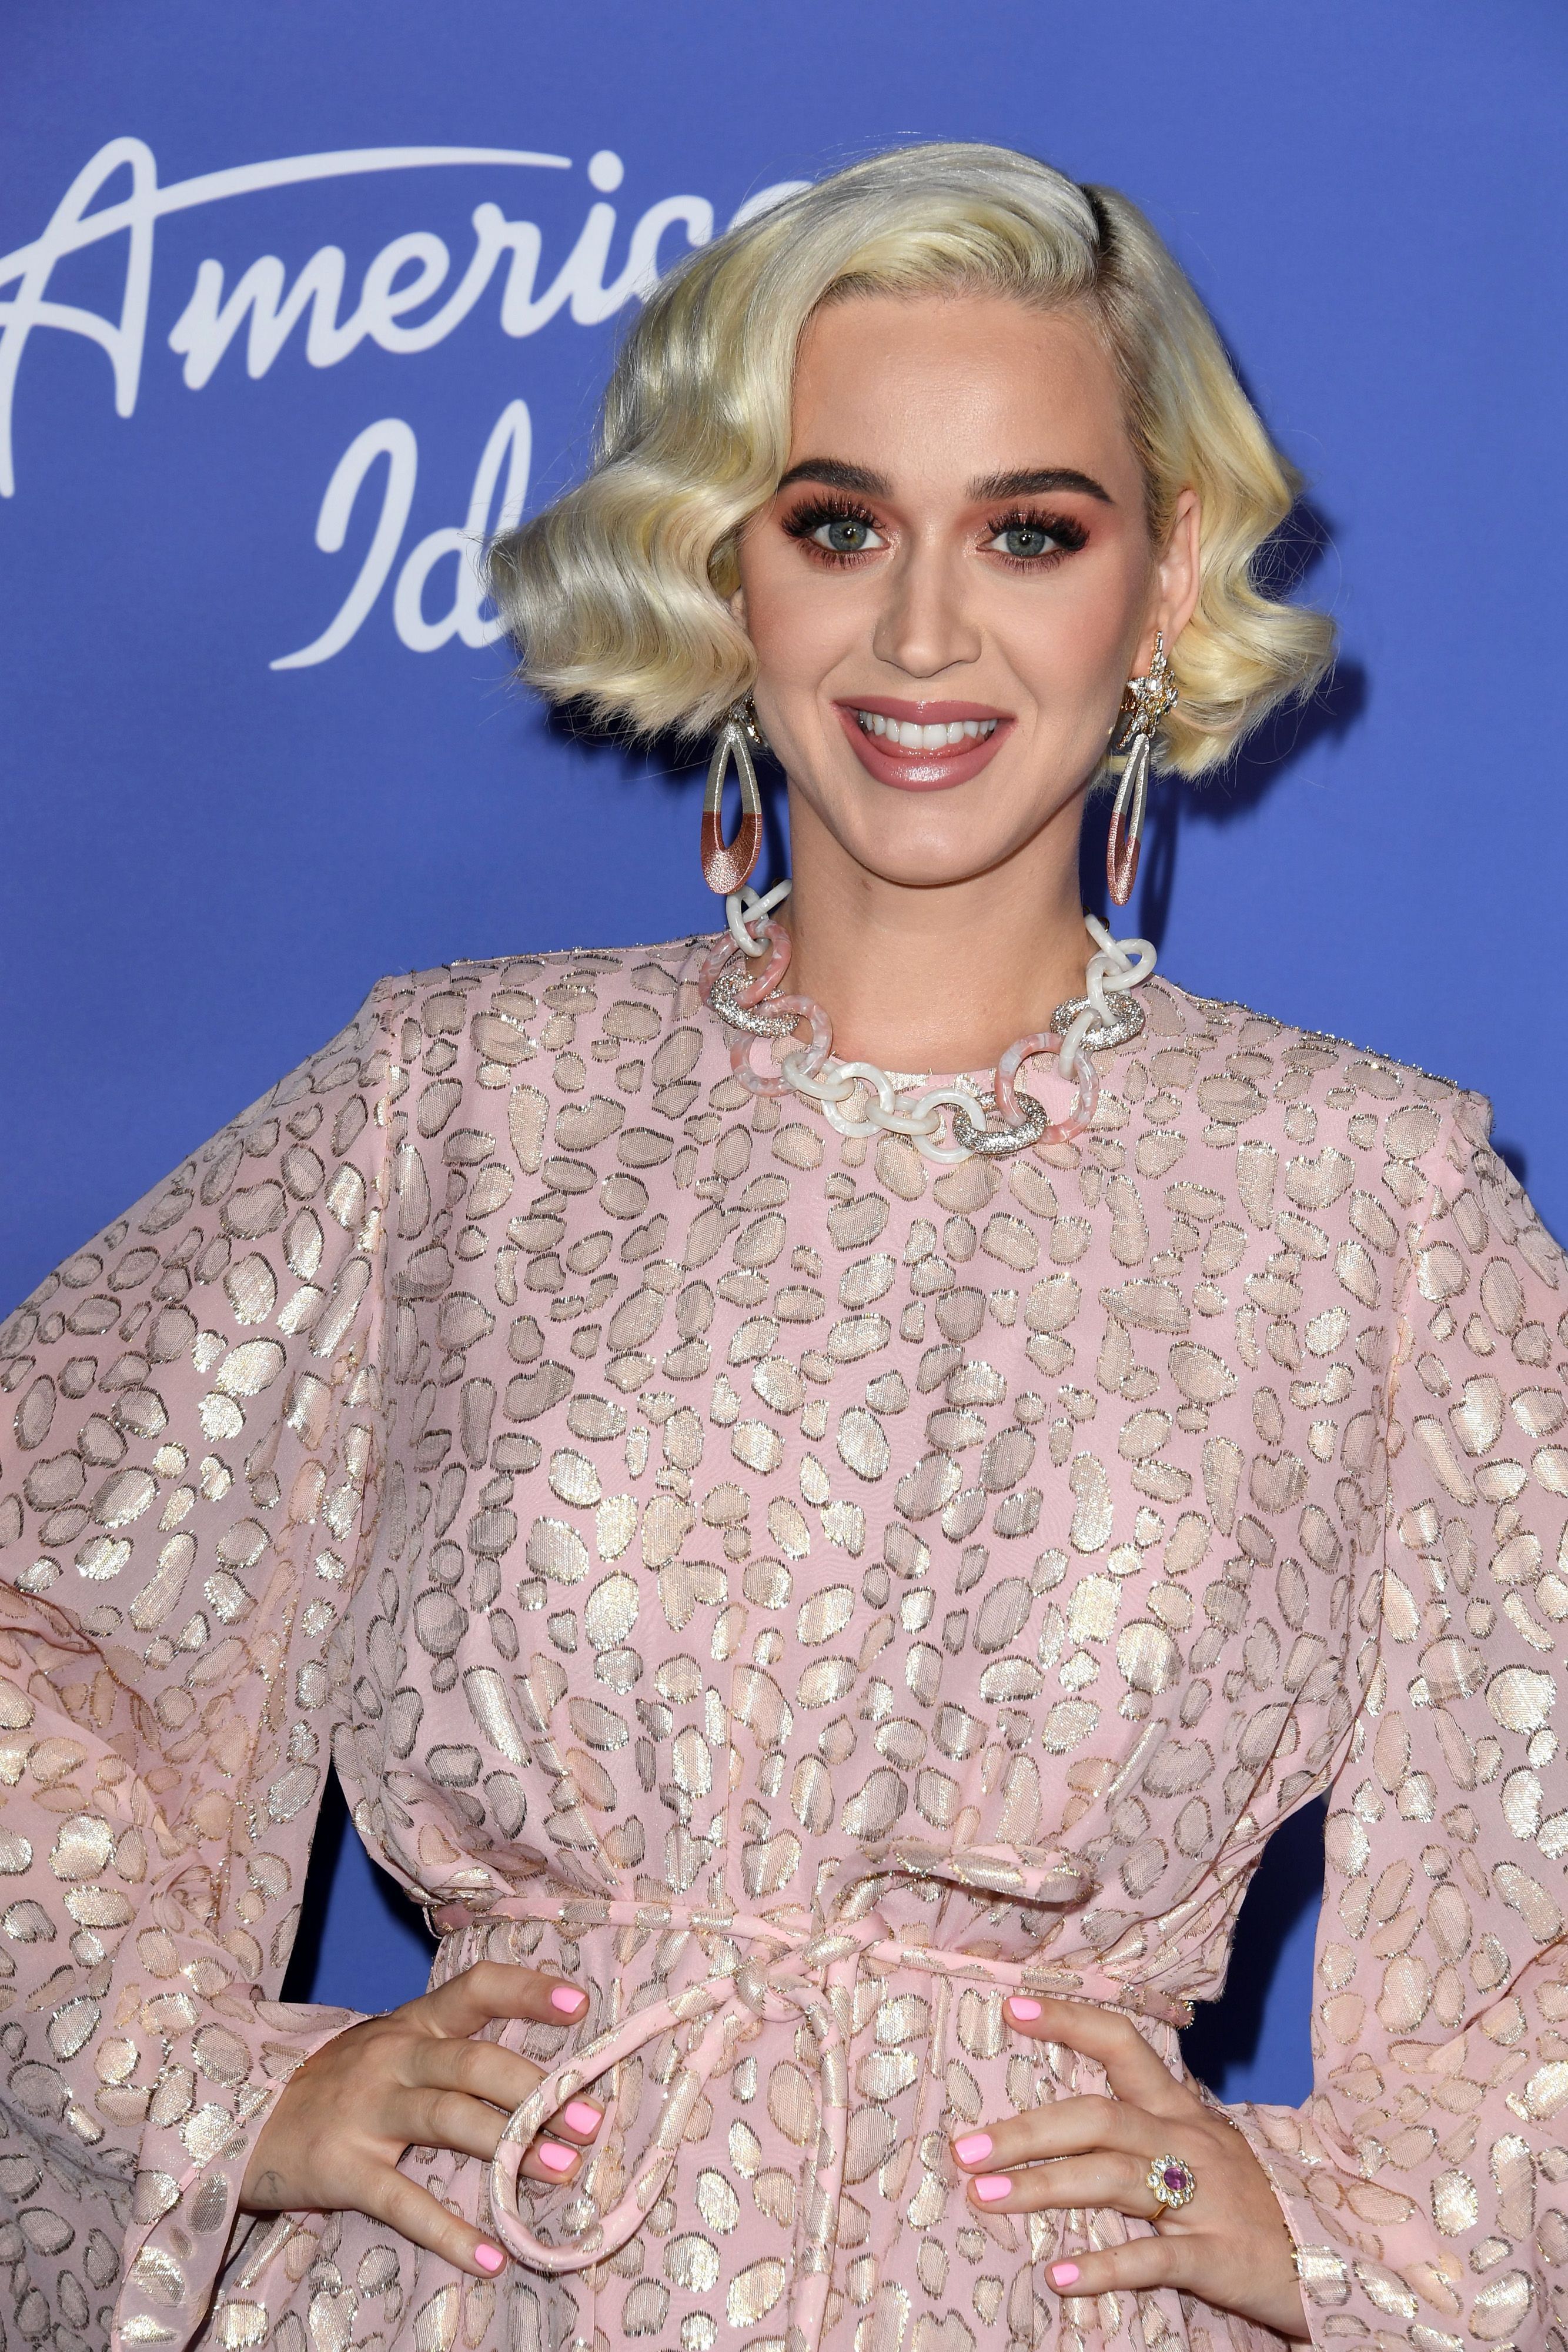 American Idol' Judge Katy Perry Subtly Revealed Big News About Her New  Podcast Project